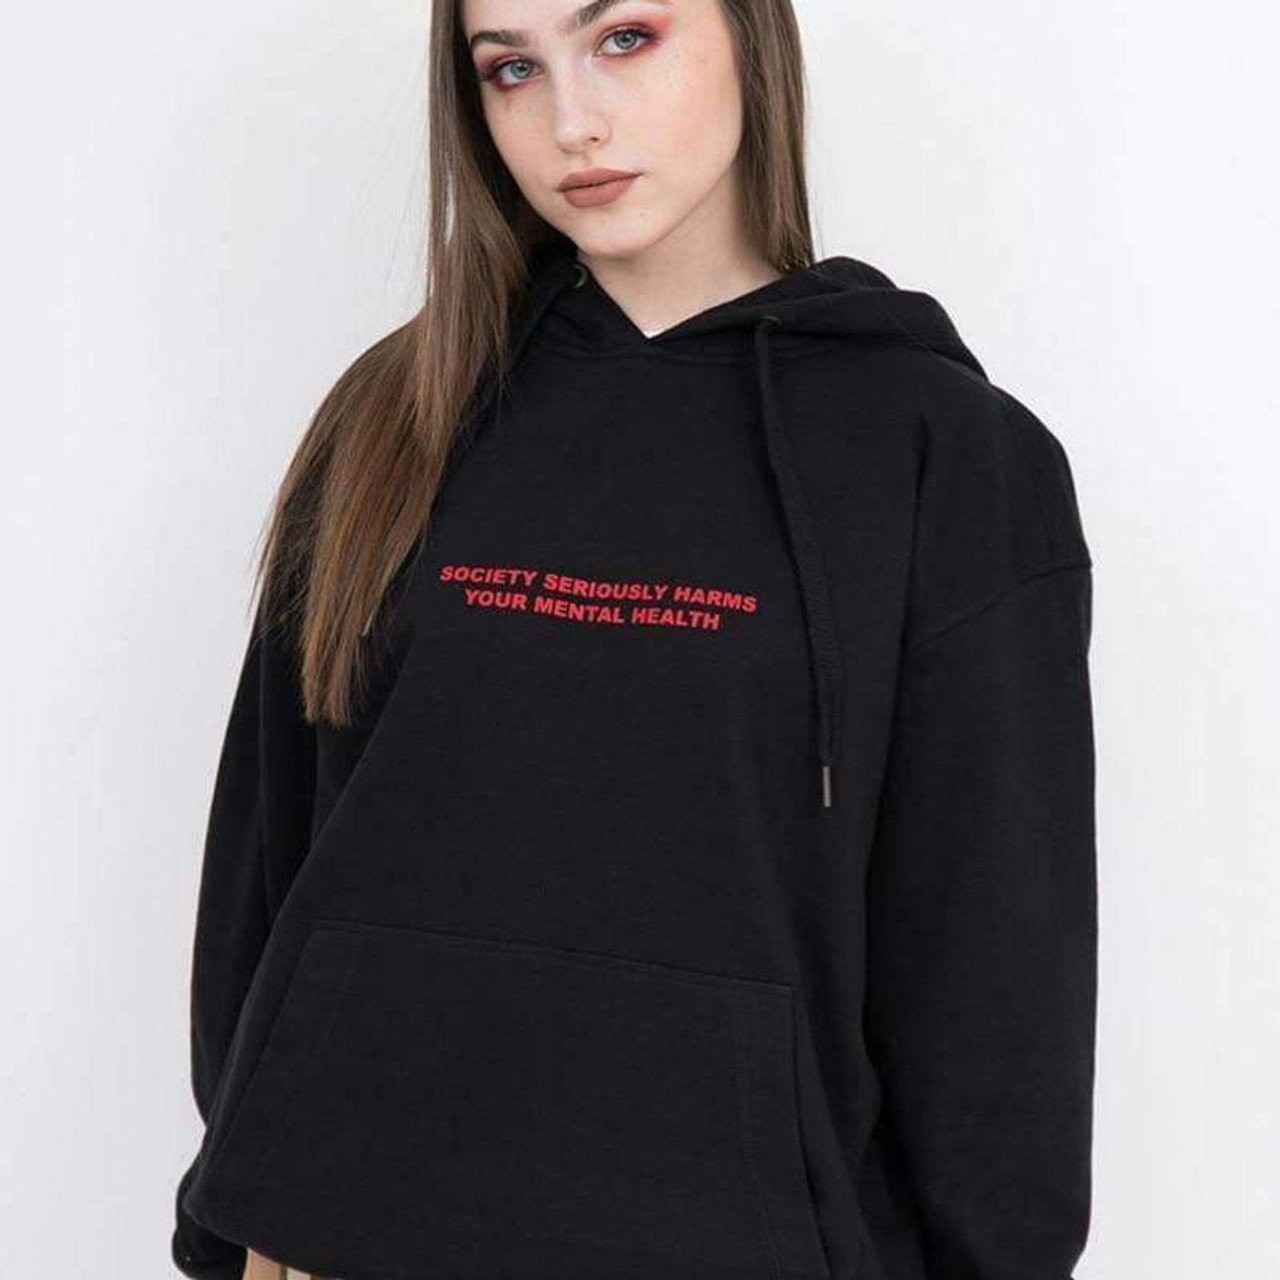 Society Seriously Harms Your Mental Health Hoodie - Cosmique Studio ...